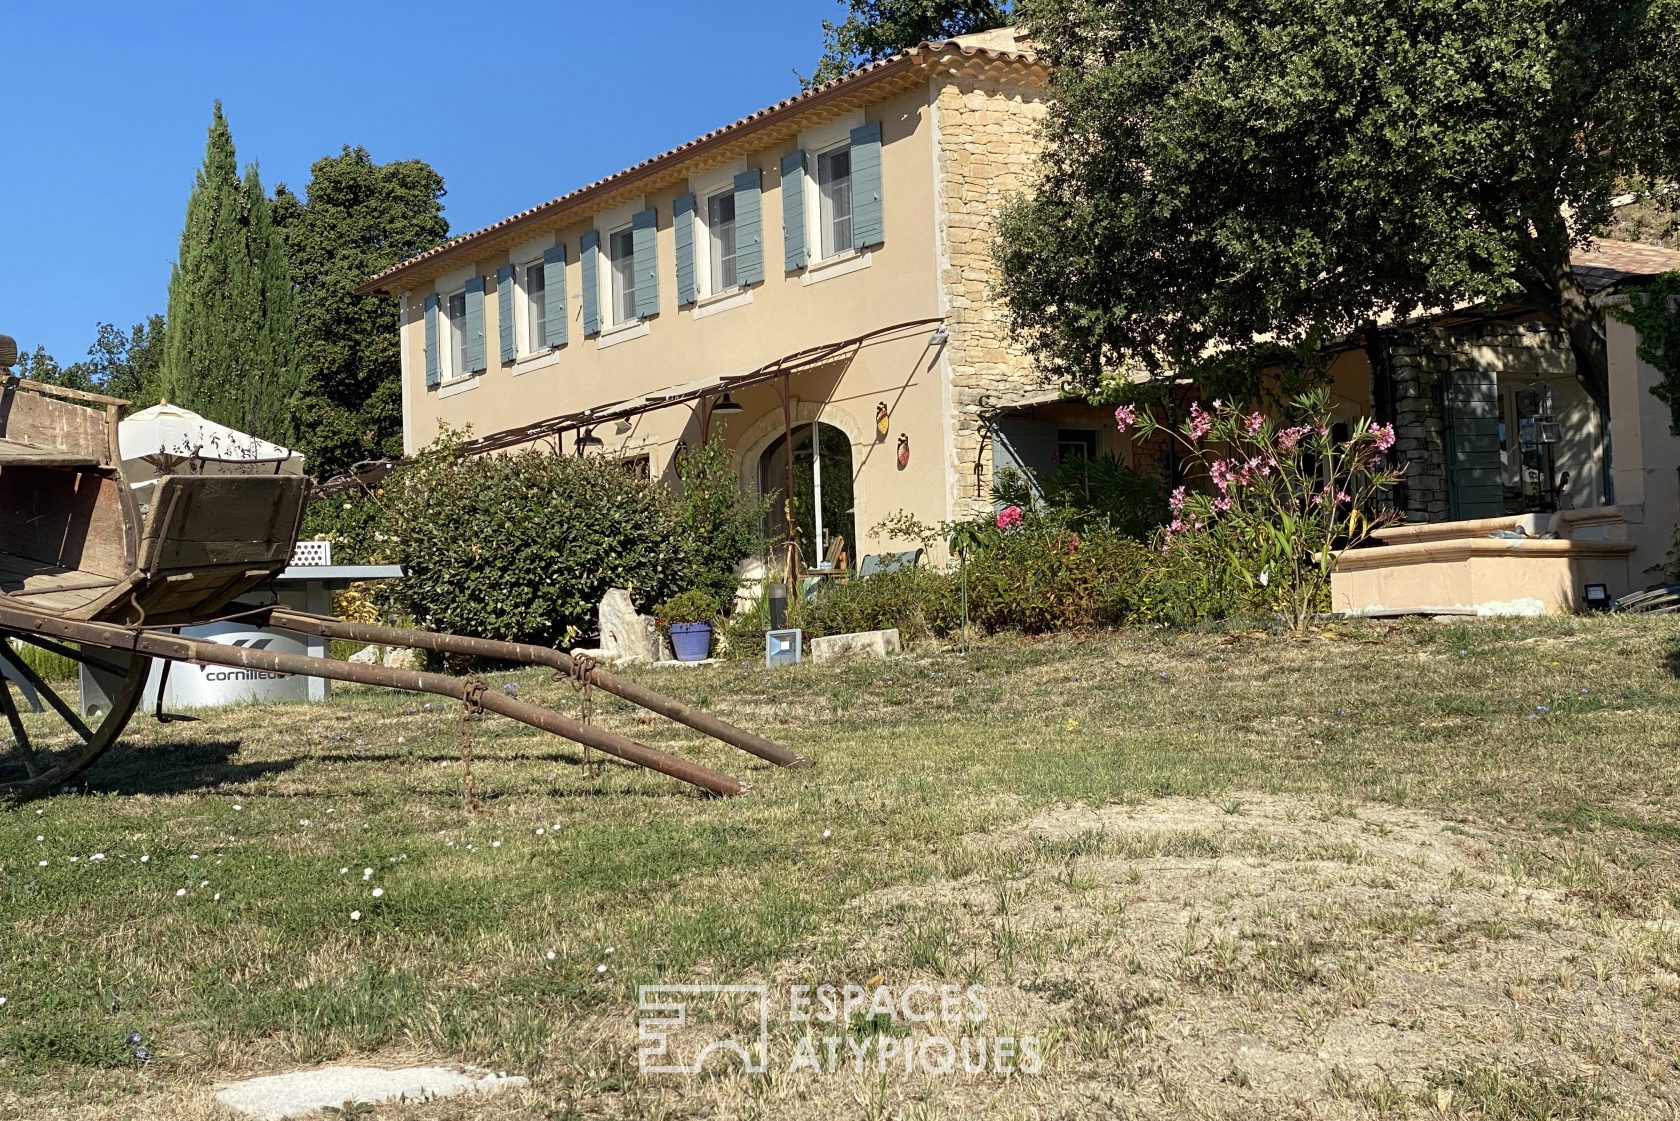 The Provencal country house